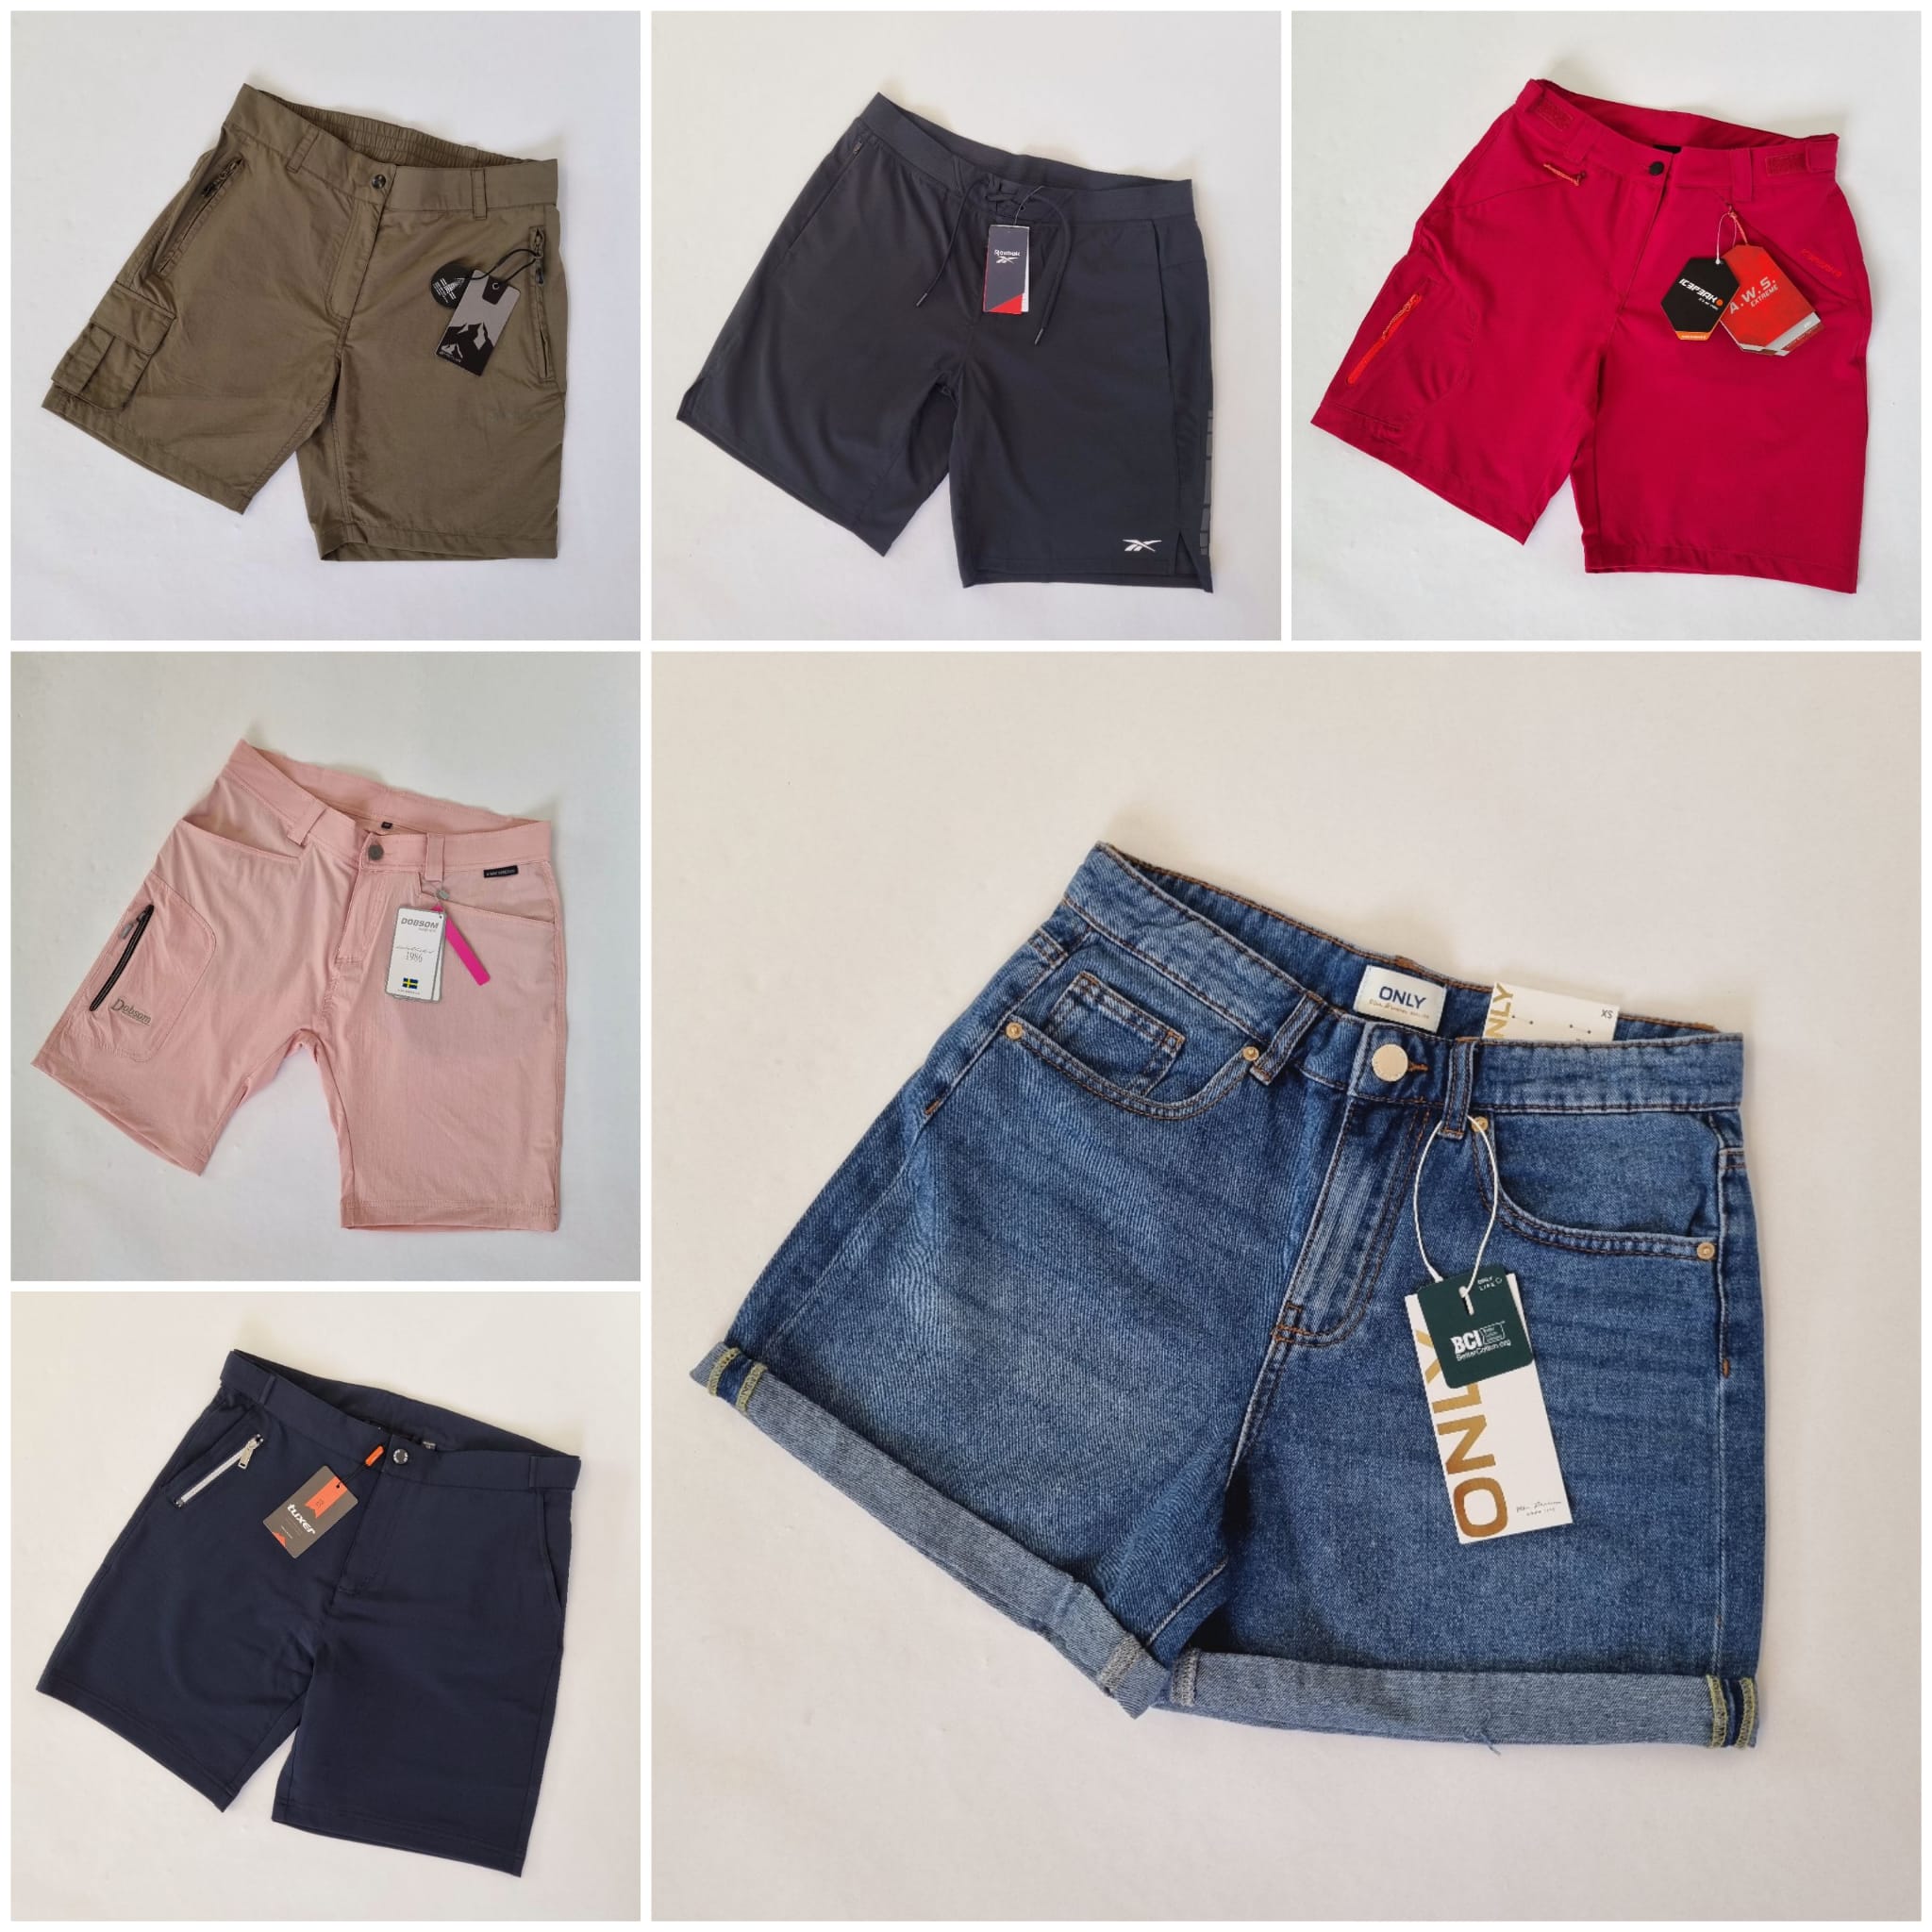 Mix of men's and women's shorts